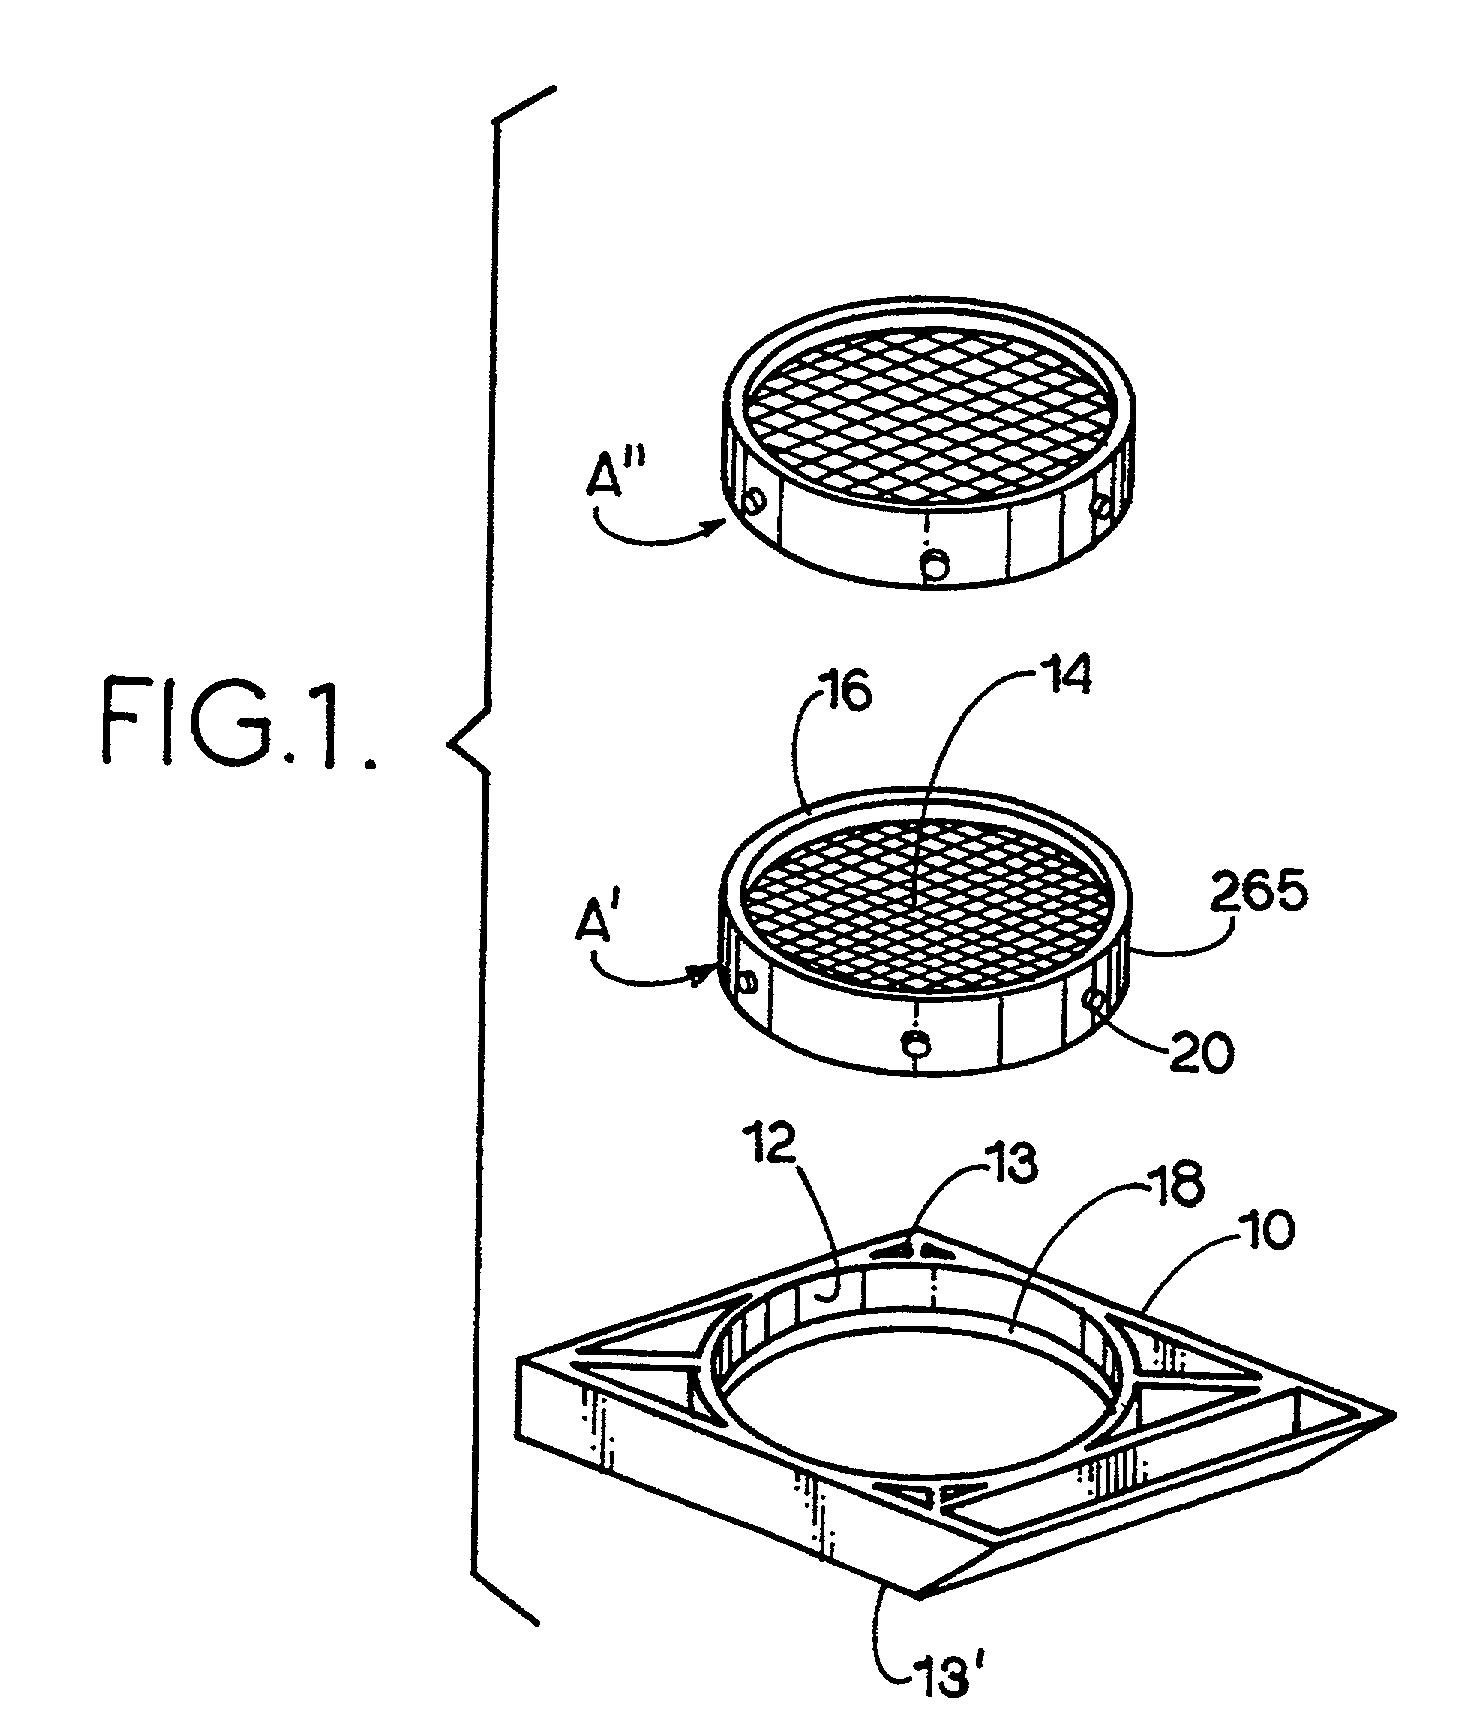 Apparatus and method for harvesting and handling tissue samples for biopsy analysis